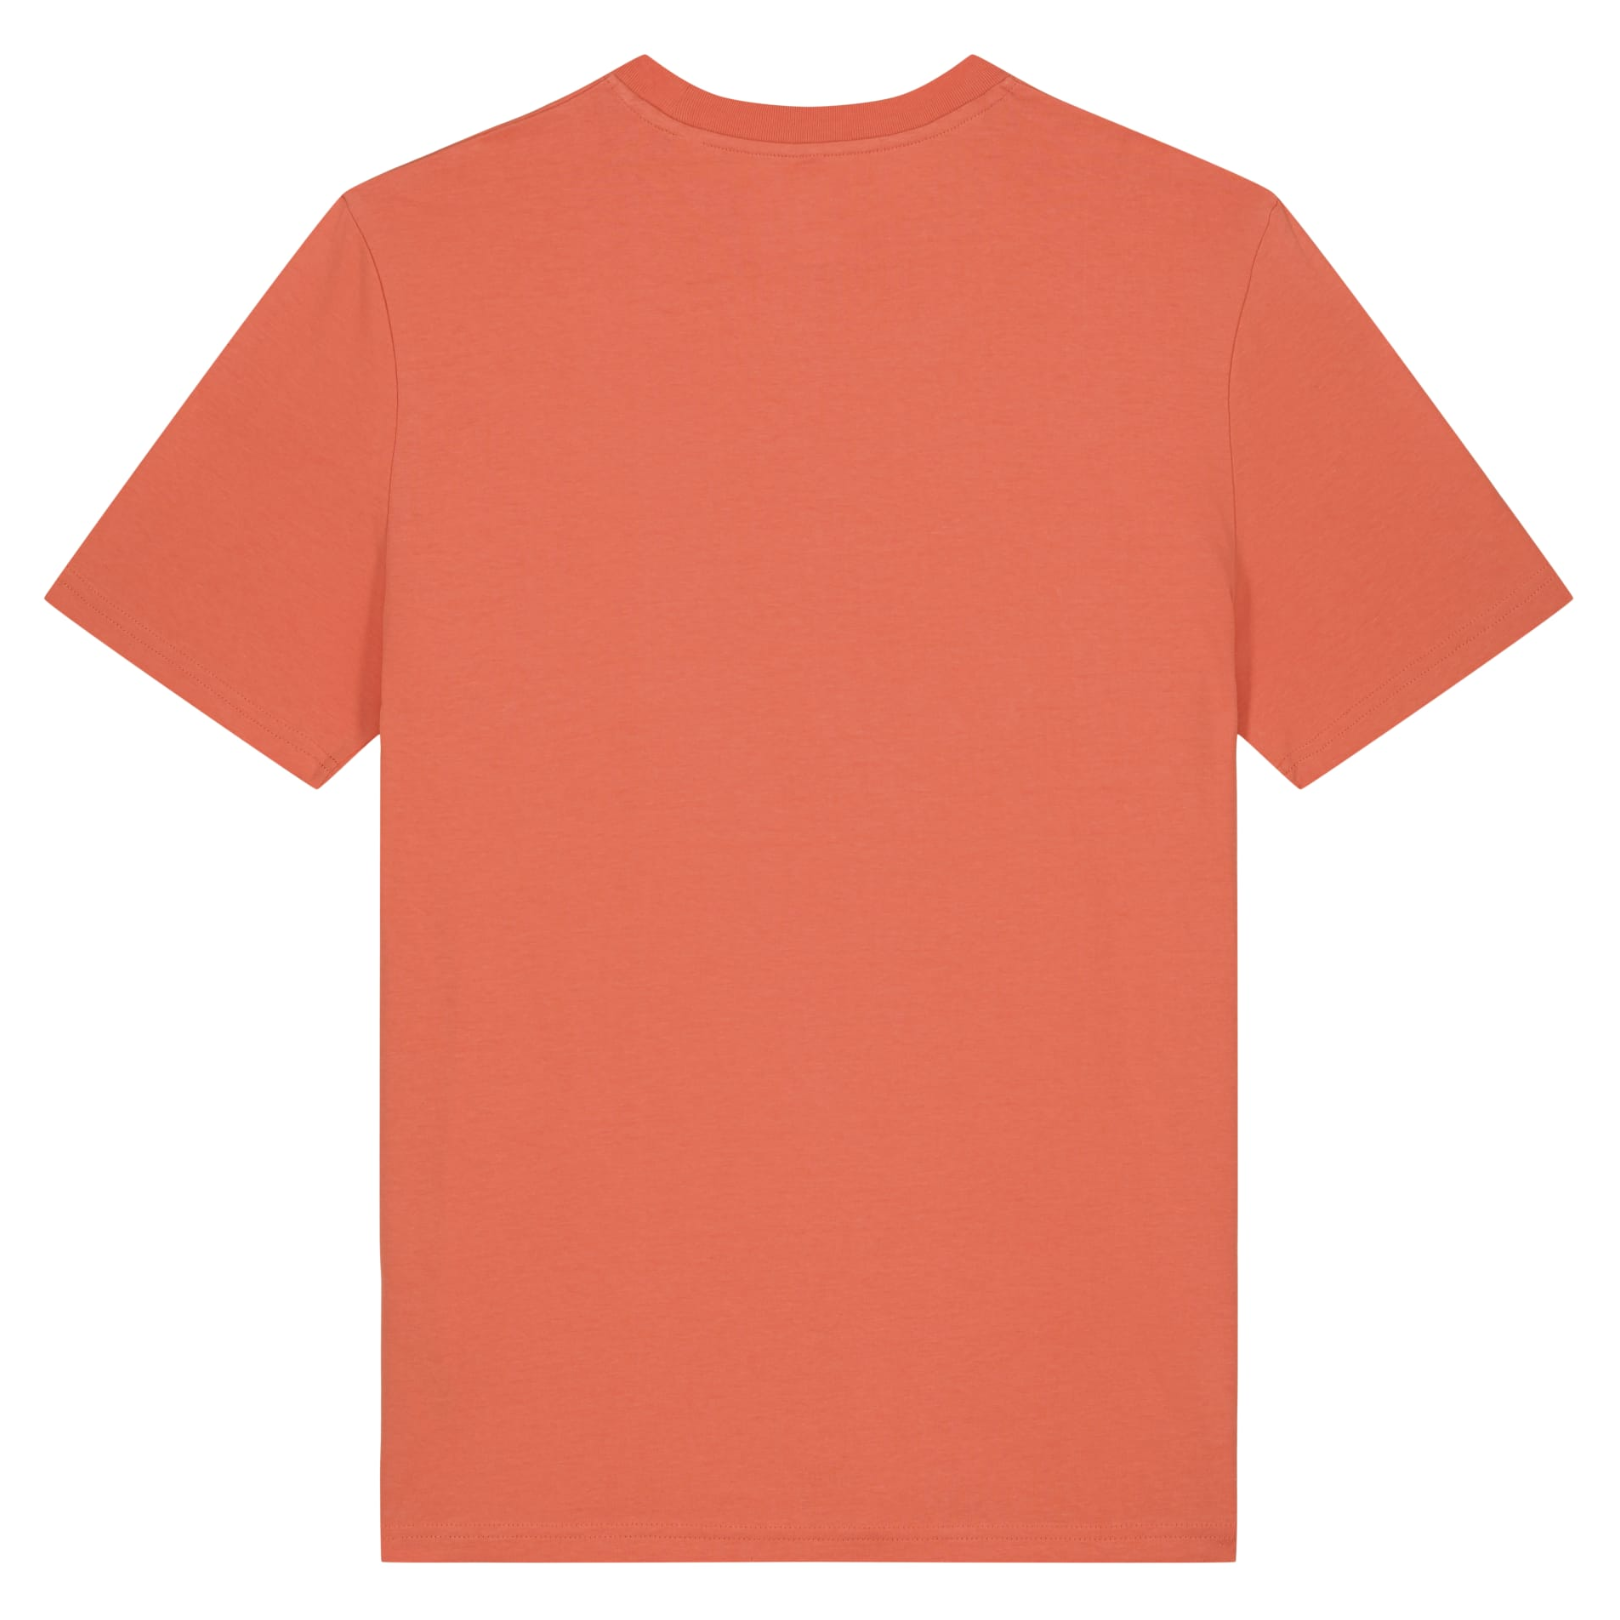 The back of our vibrant orange organic cotton t-shirt from our Seaside Rock collection of t-shirts. Exclusively from Waves and Wild Water, these tees are great for wild swimmers and sea dippers.